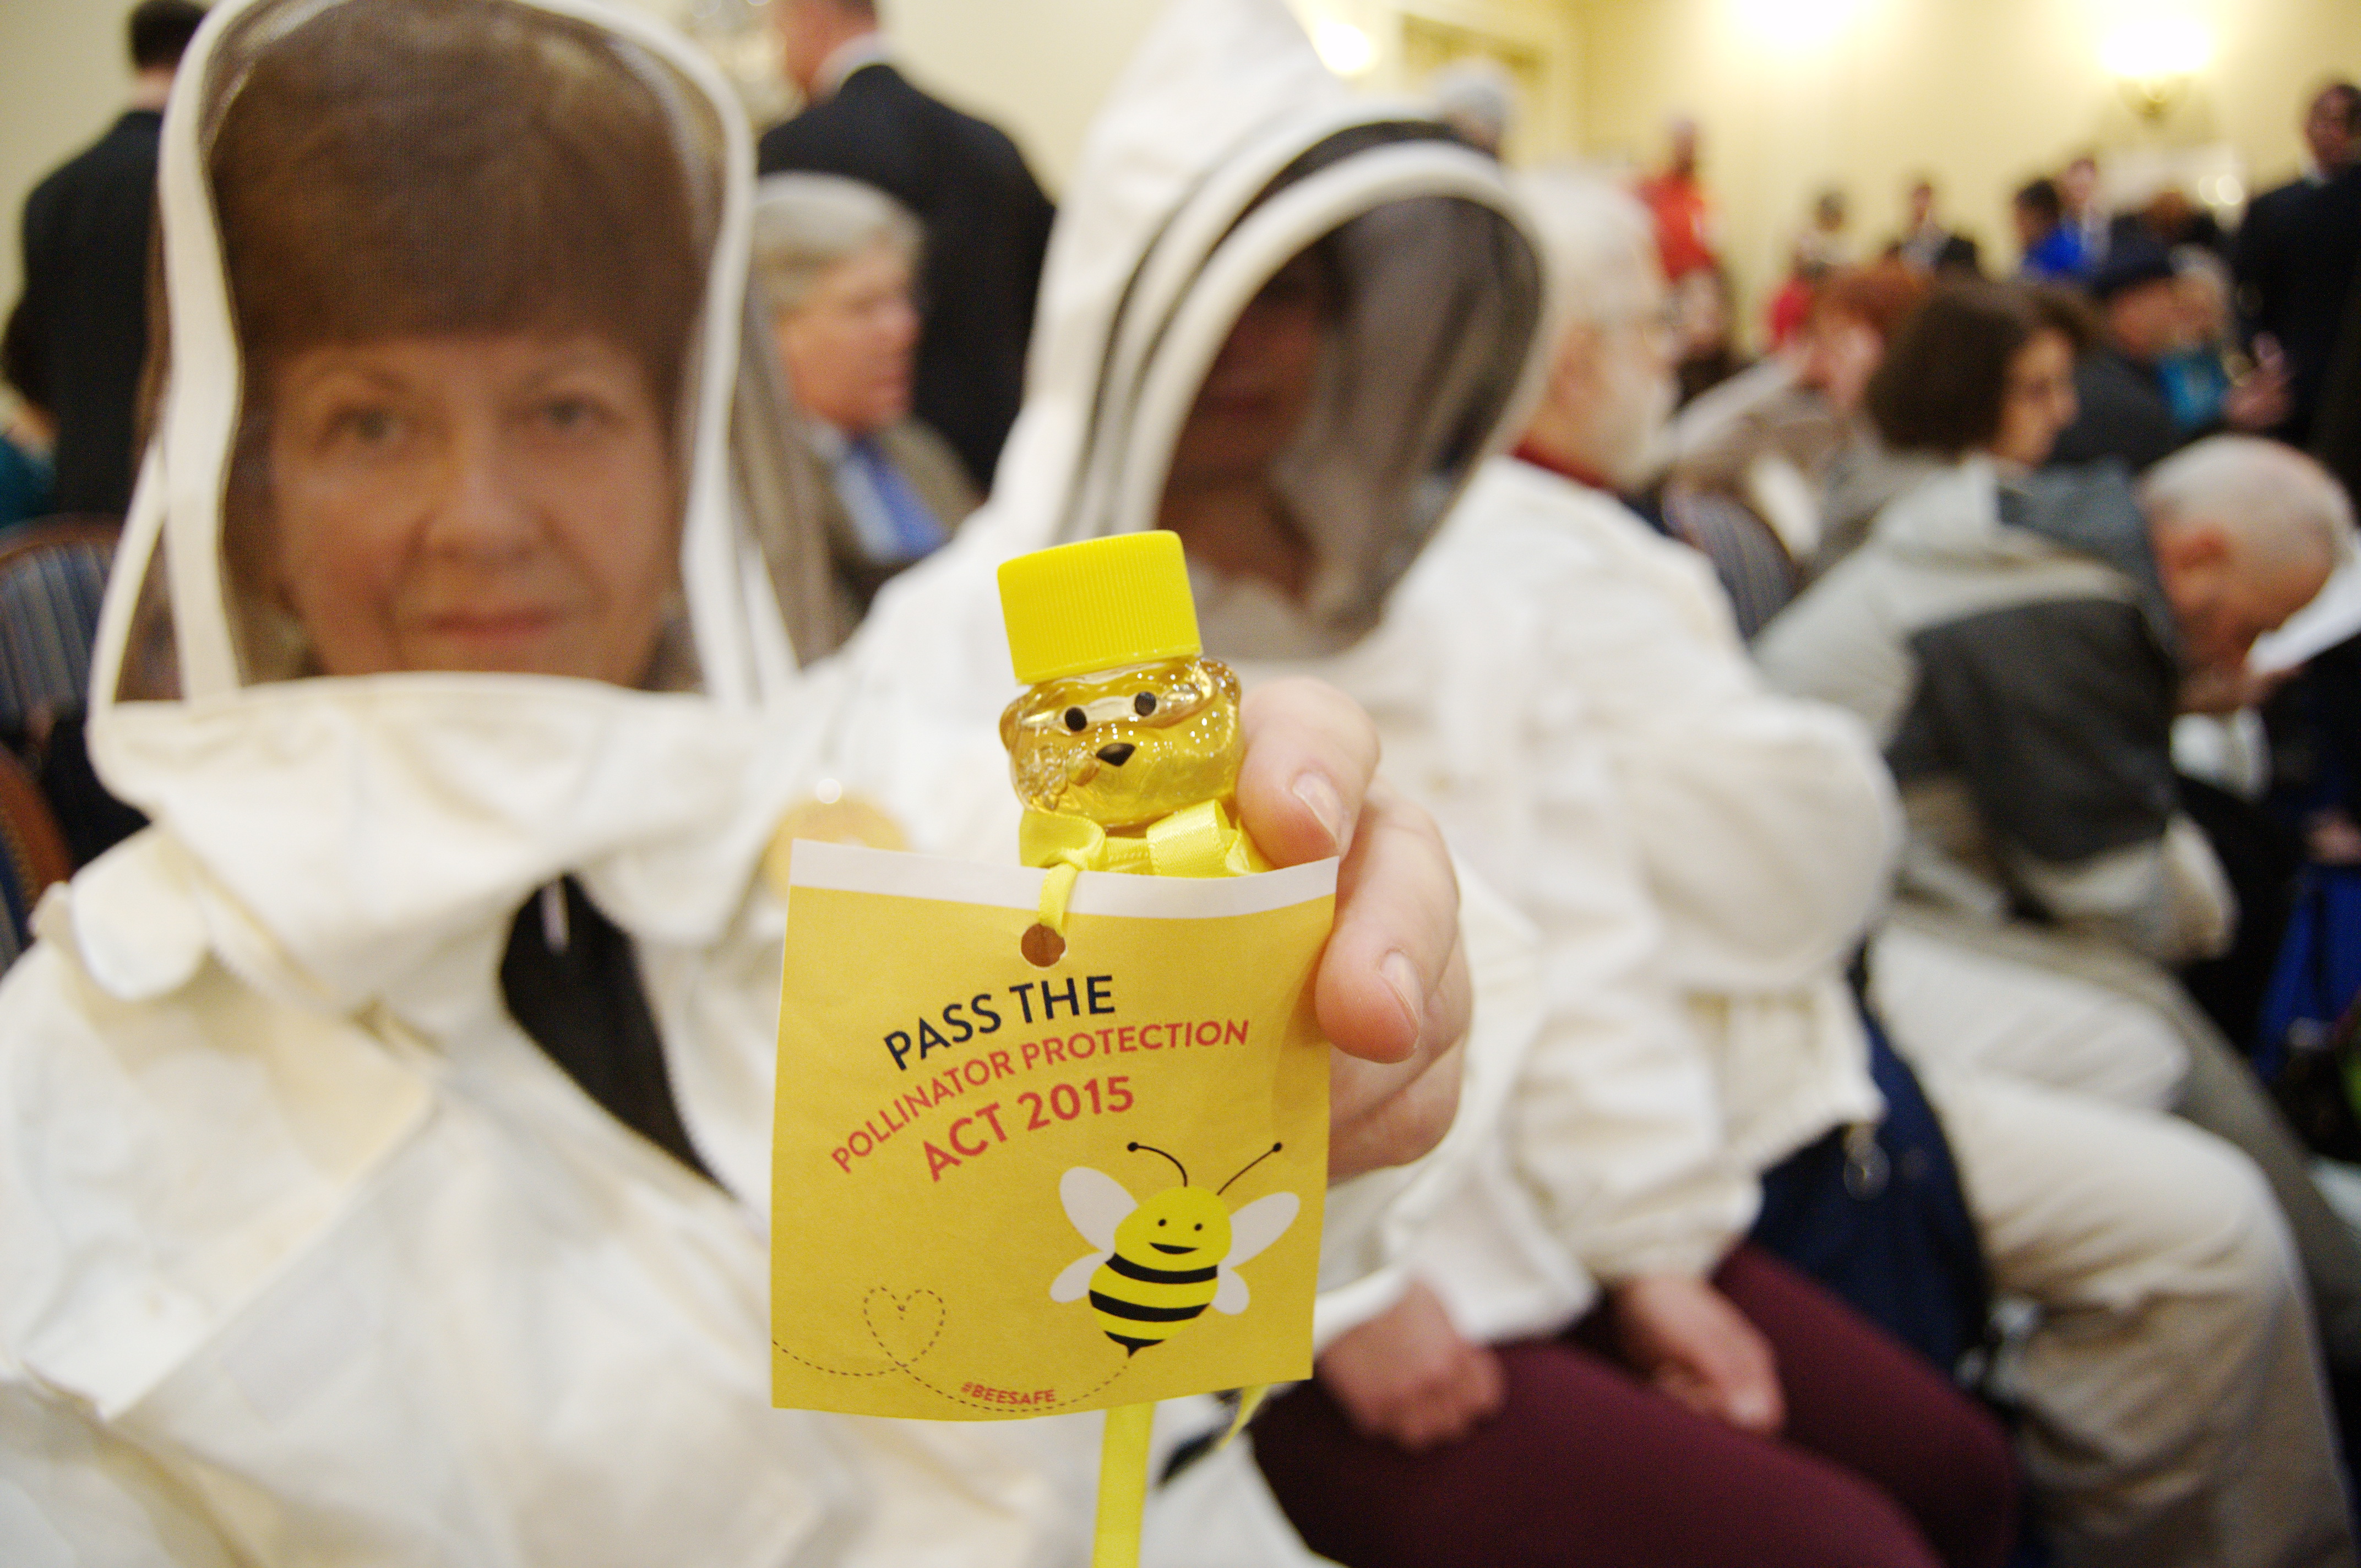 Beekeepers hope legislators will act on pesticide to protect hives